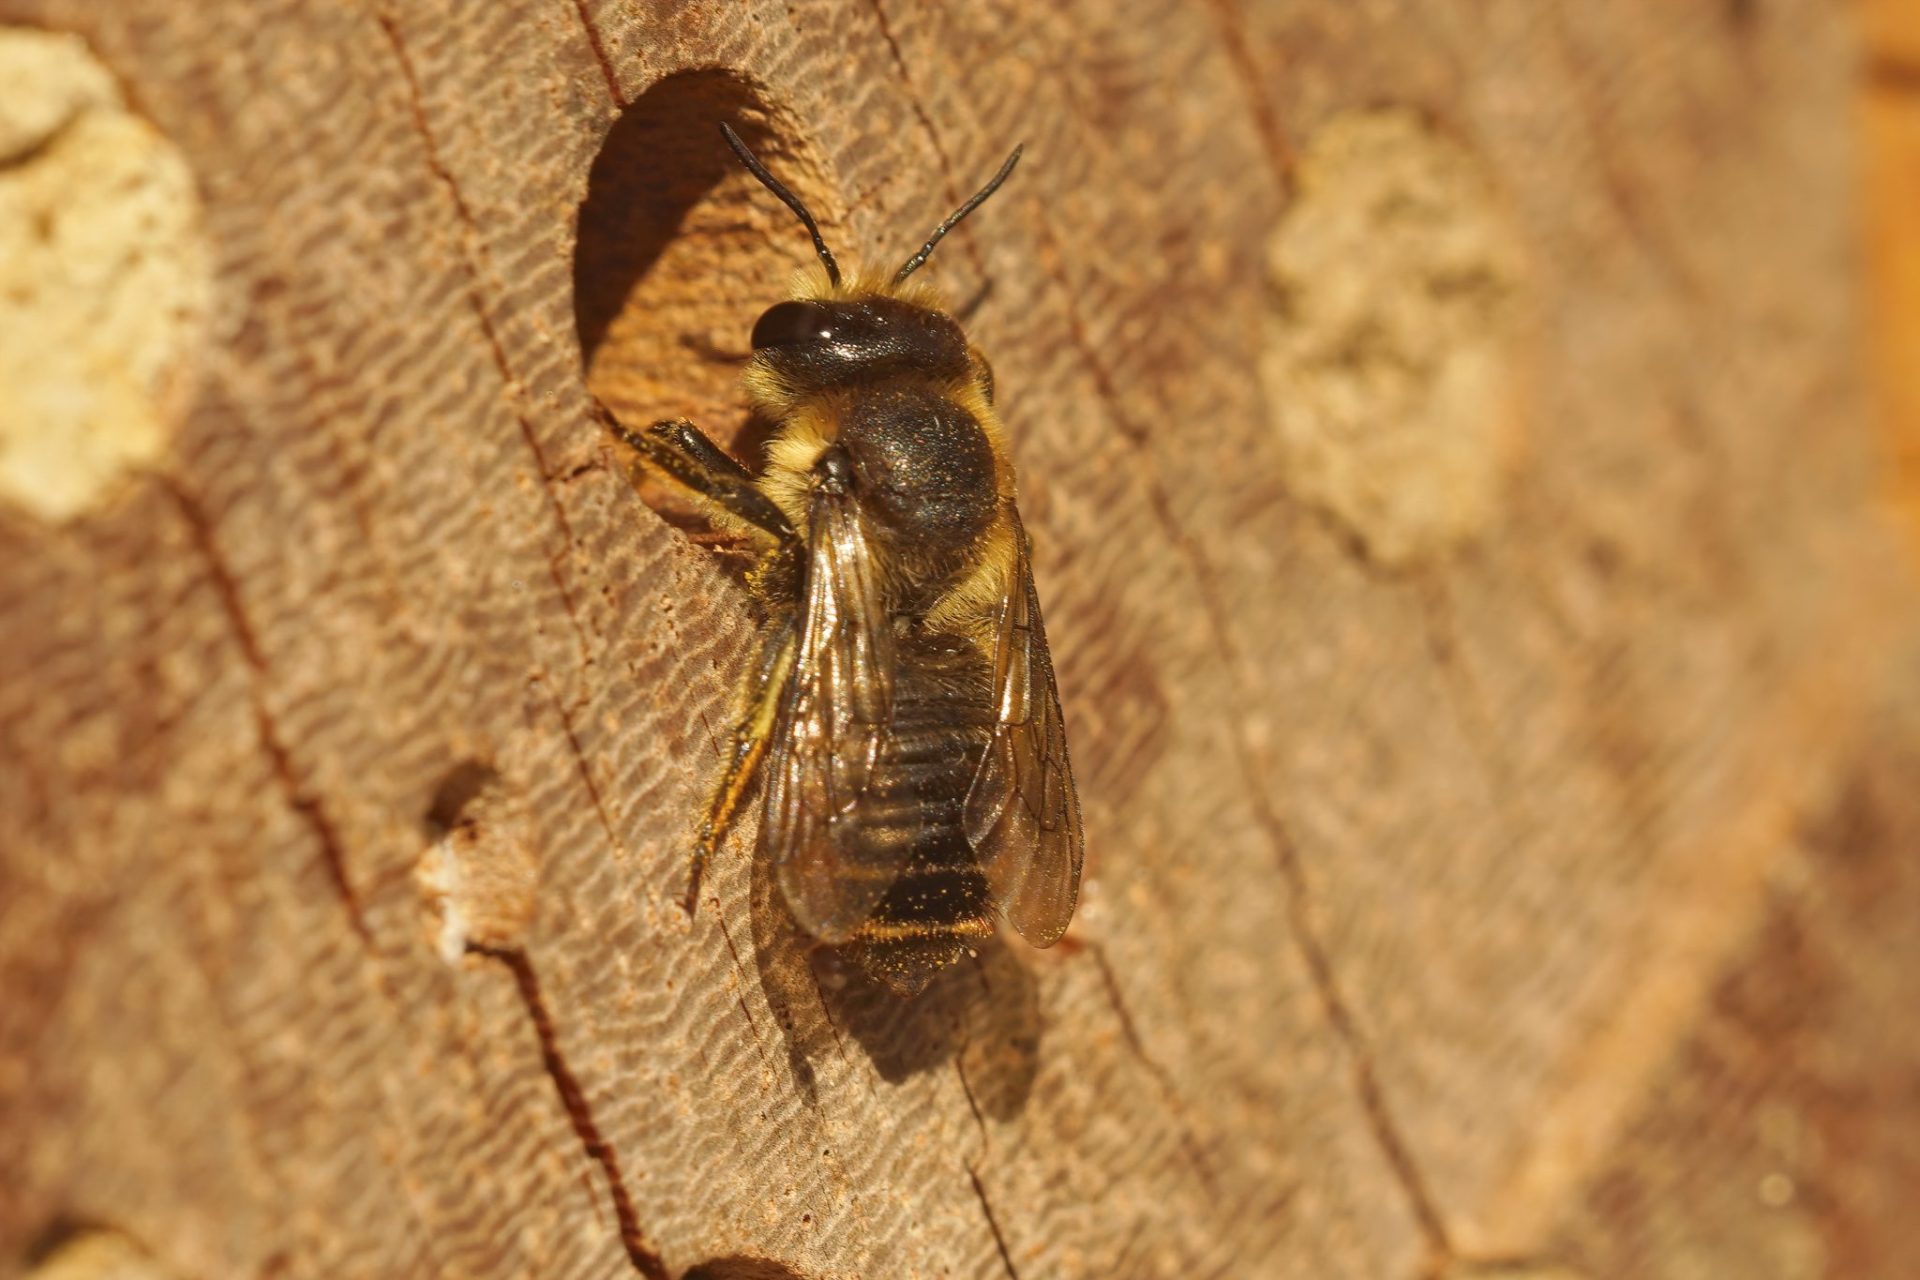 Diseases and Pests that Affect Leafcutter Bees